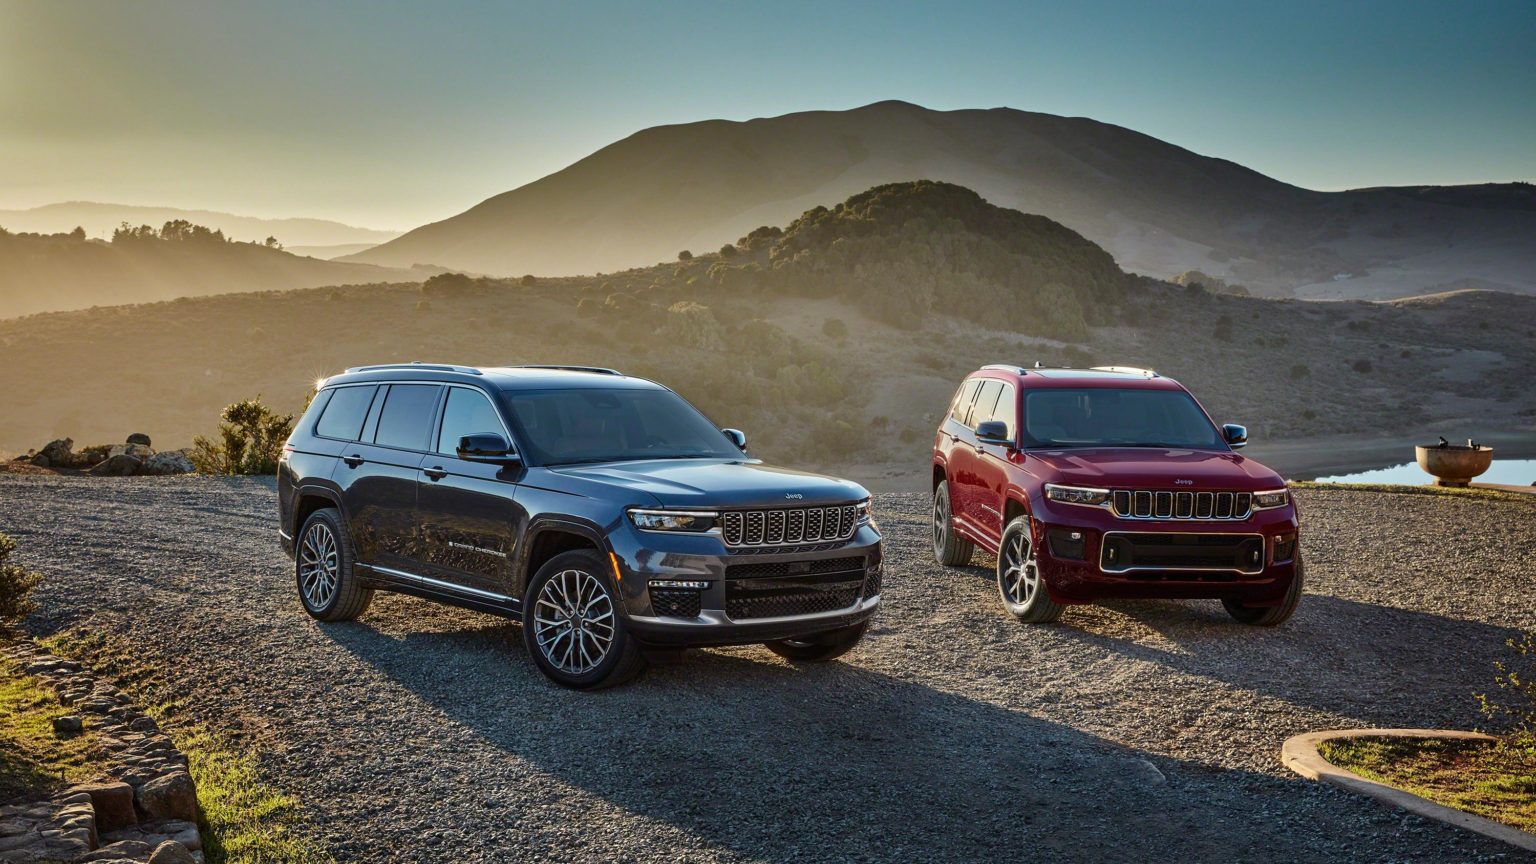 The Grand Cherokee L is available with two different powertrain choices.